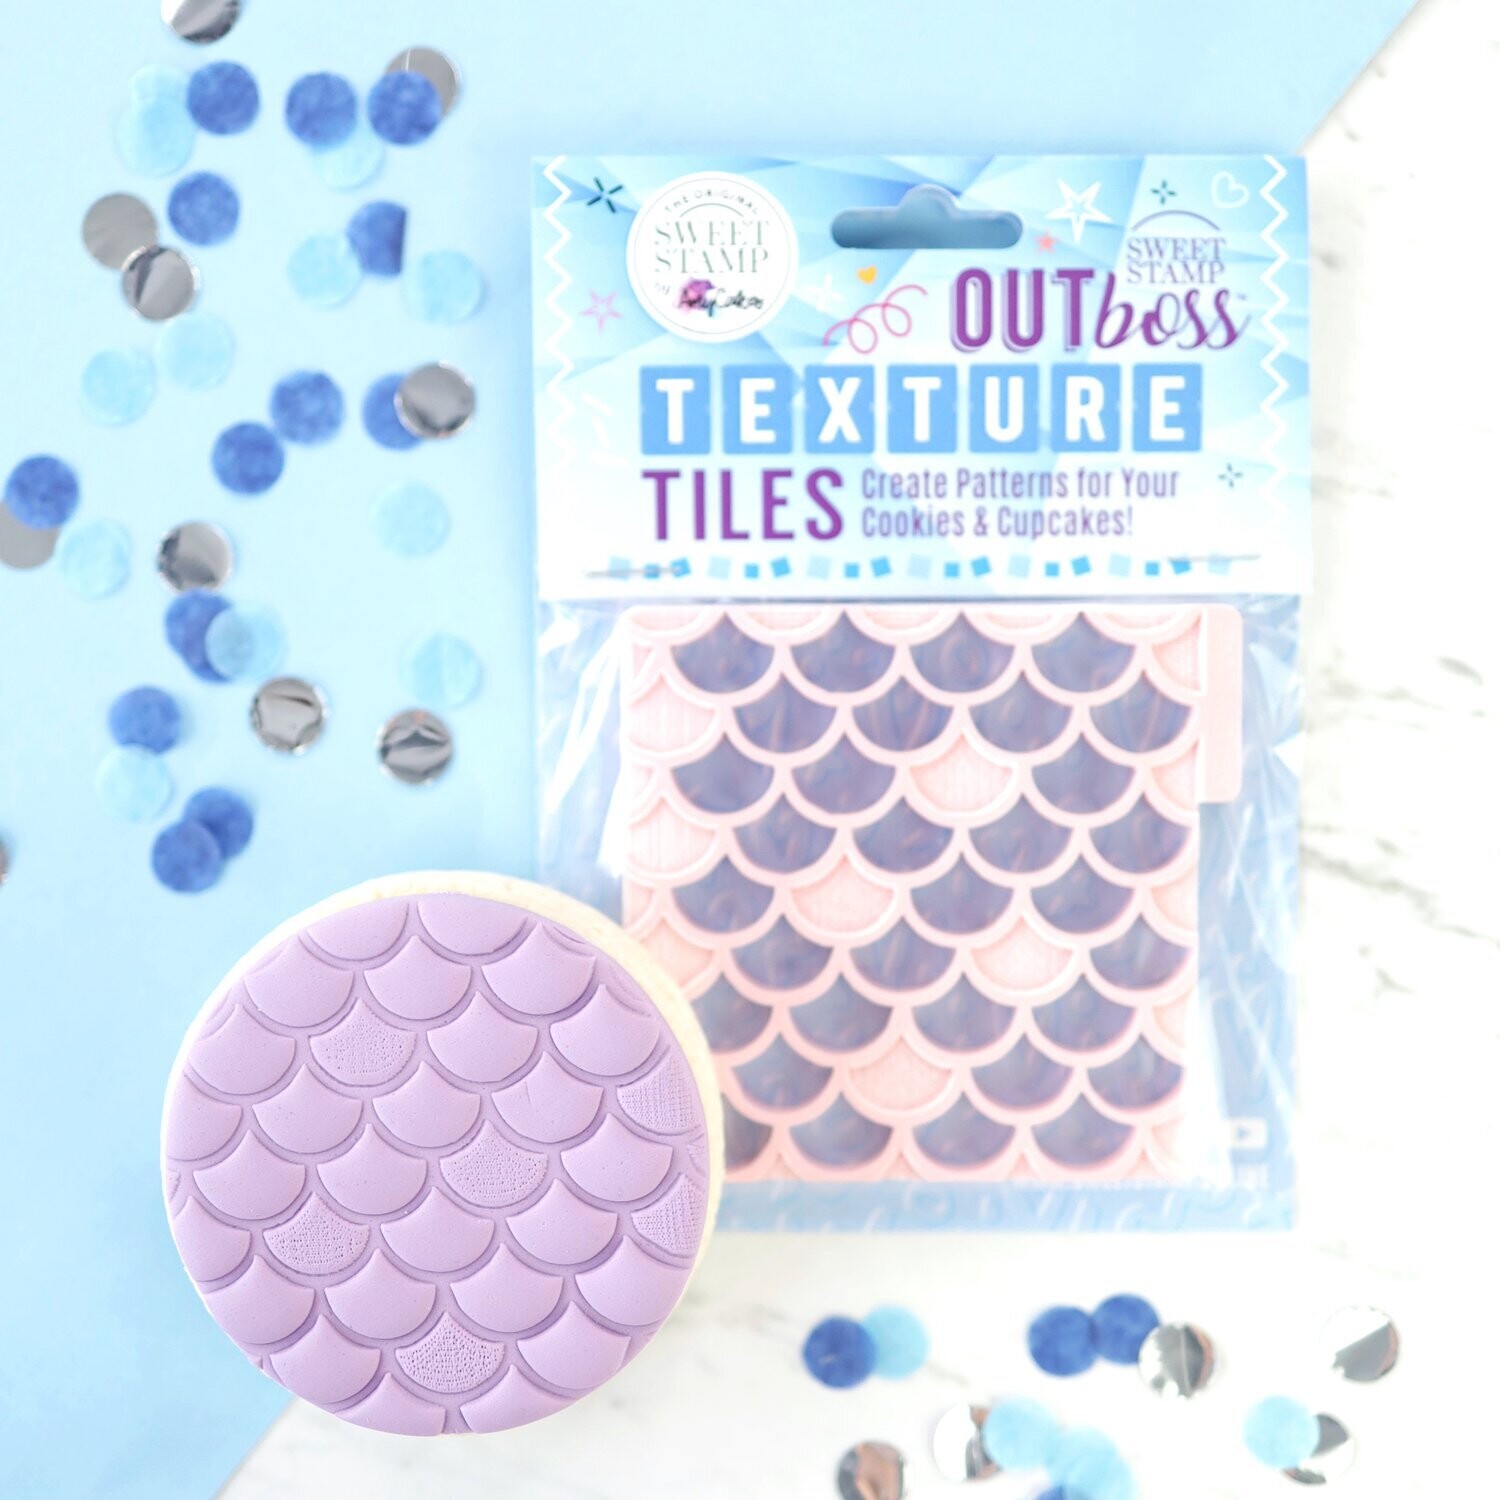 Sweet Stamp -OUTboss Texture Tiles -MERMAID TAIL - Σφραγίδα Ουρά Γοργόνας